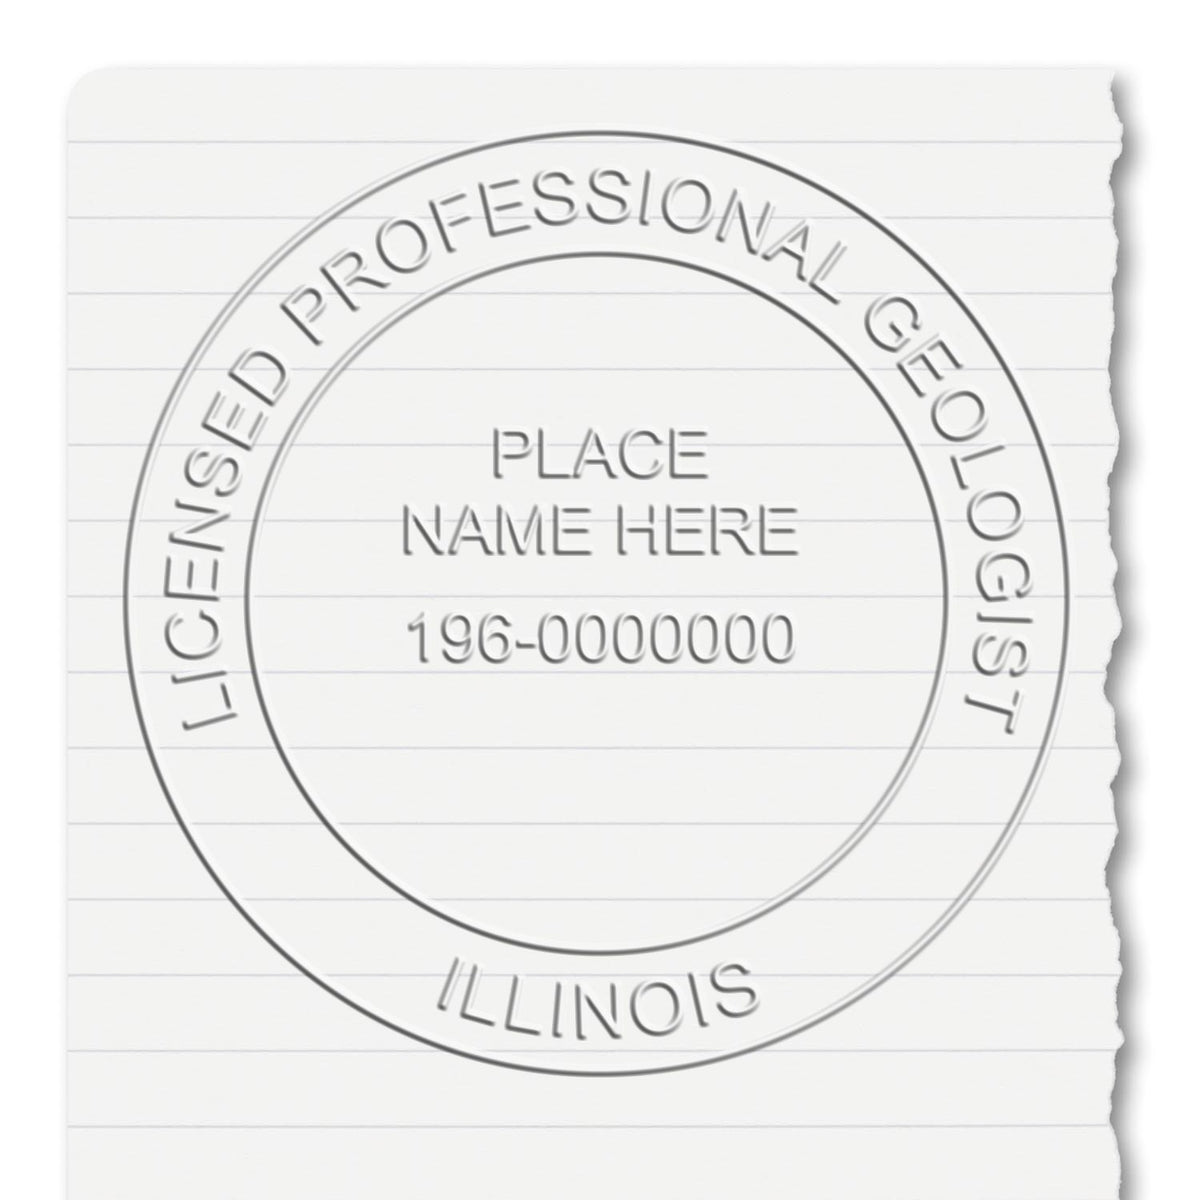 Another Example of a stamped impression of the Handheld Illinois Professional Geologist Embosser on a office form